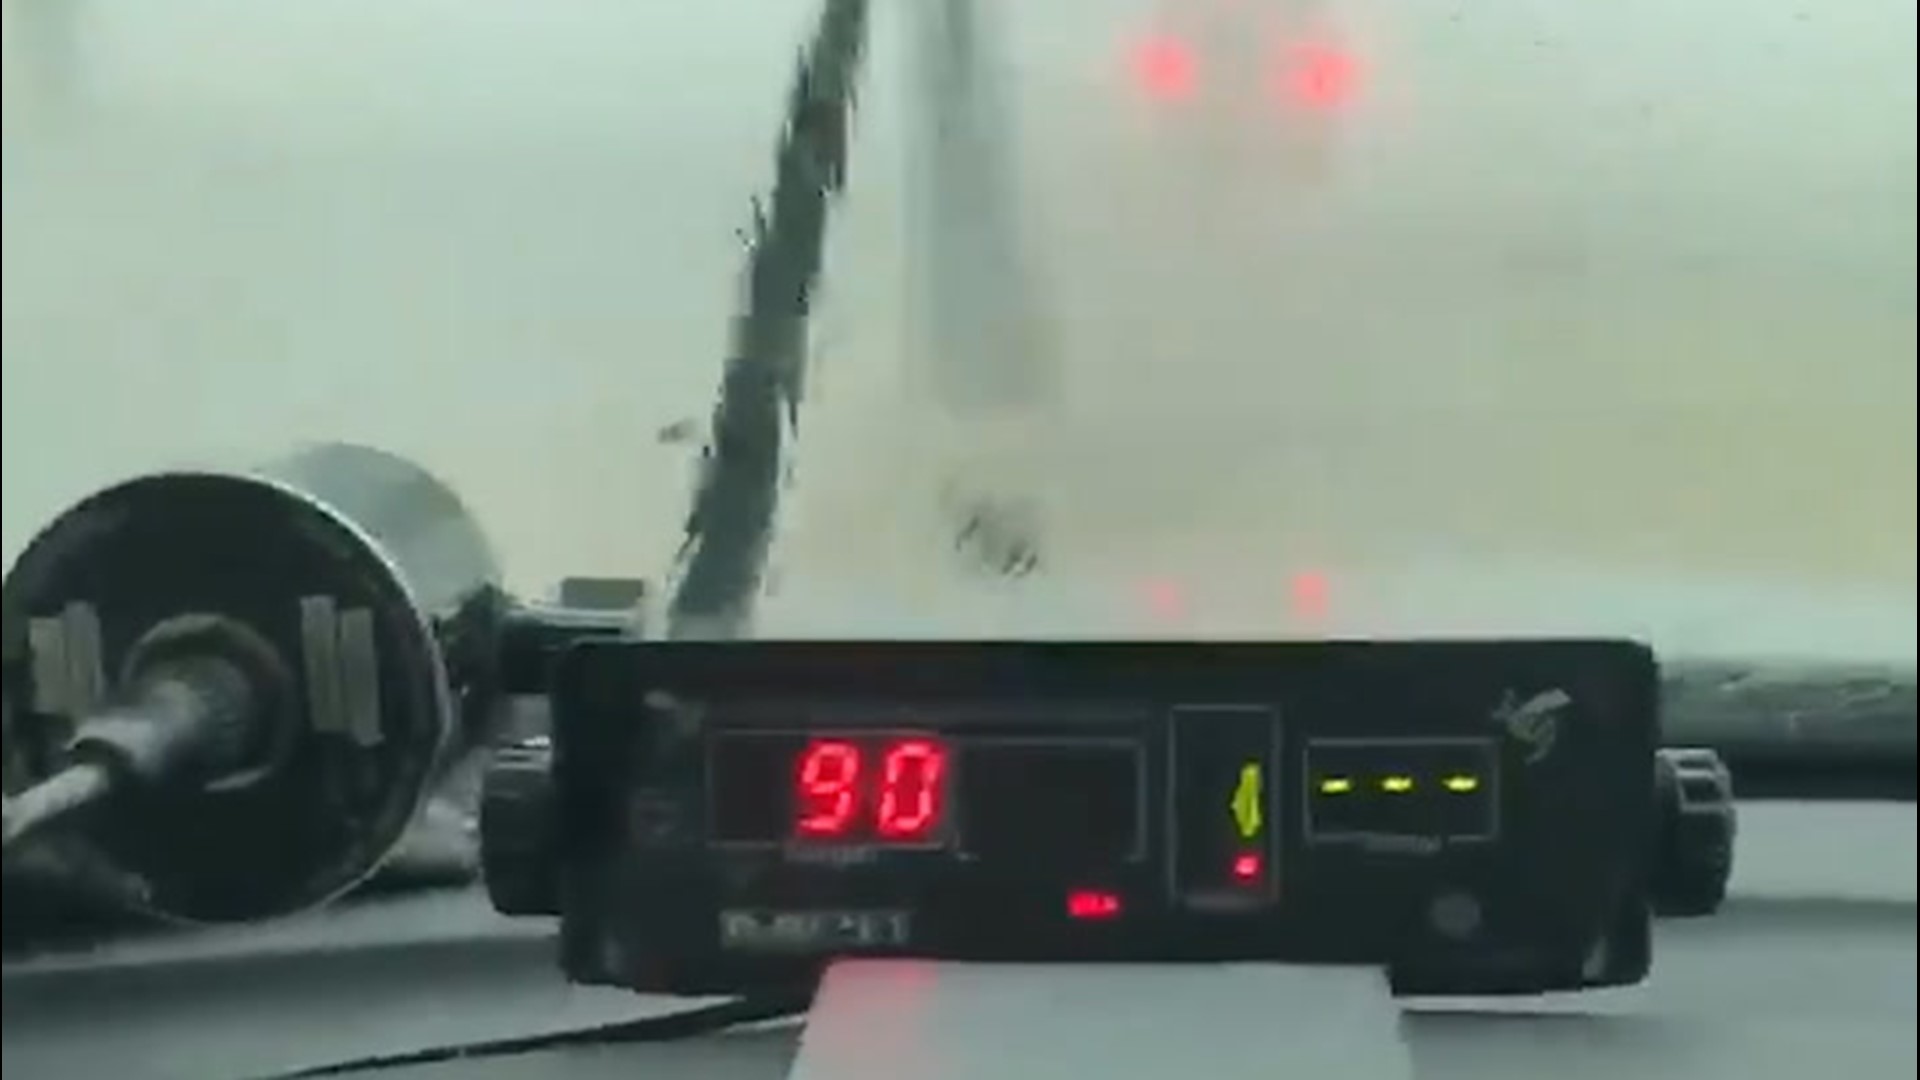 An Iowa state trooper captured wind speeds topping 90 mph during the worst part of the derecho that hit Cedar Rapids, Iowa, on Aug. 10.